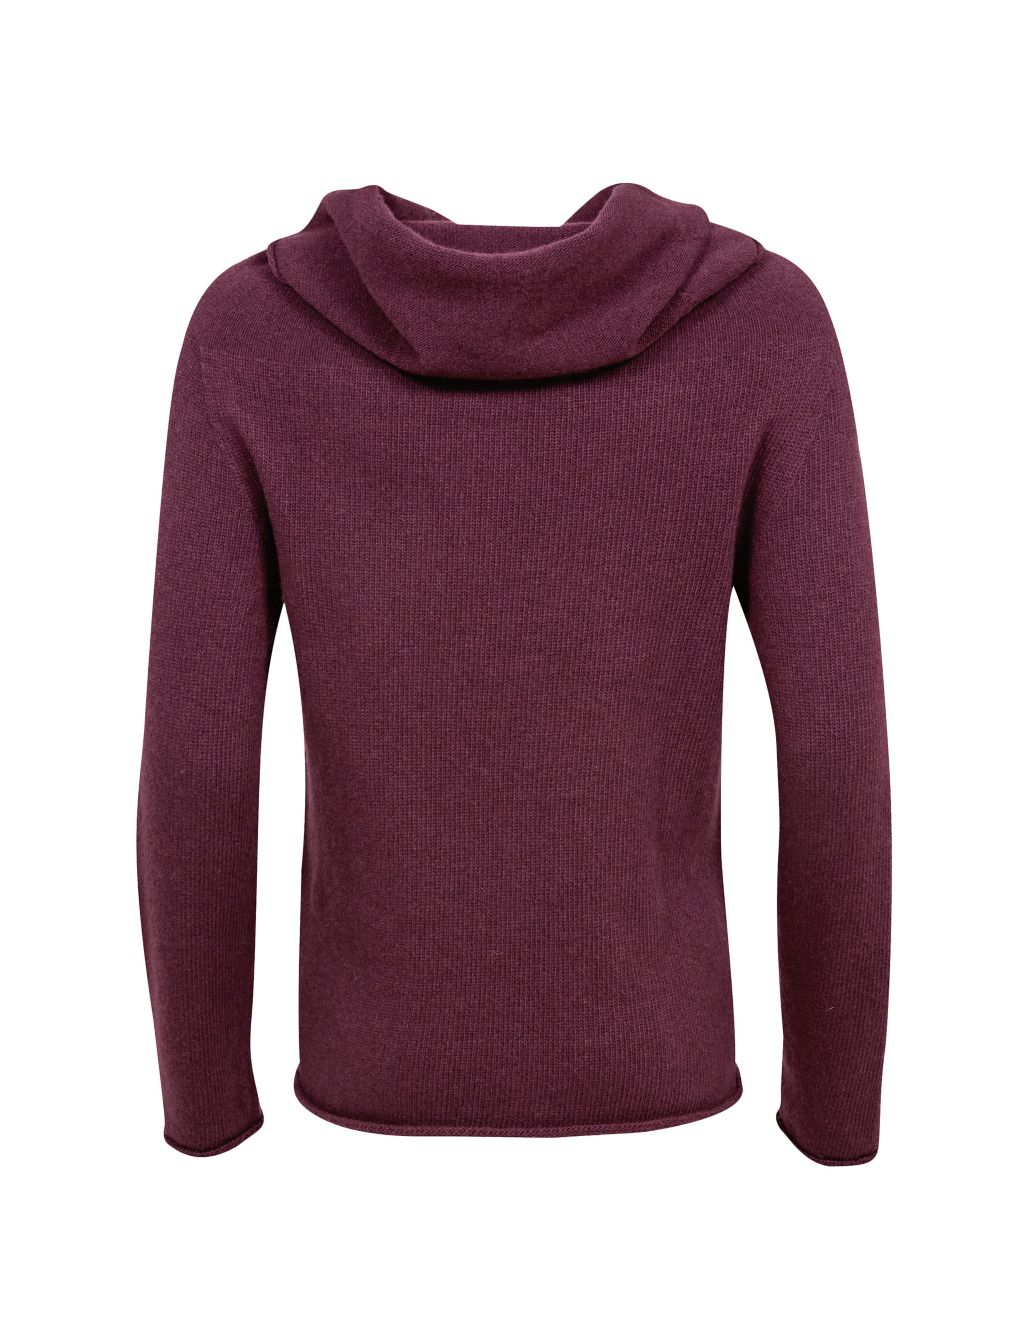 Pure Wool Funnel Neck Jumper image 2